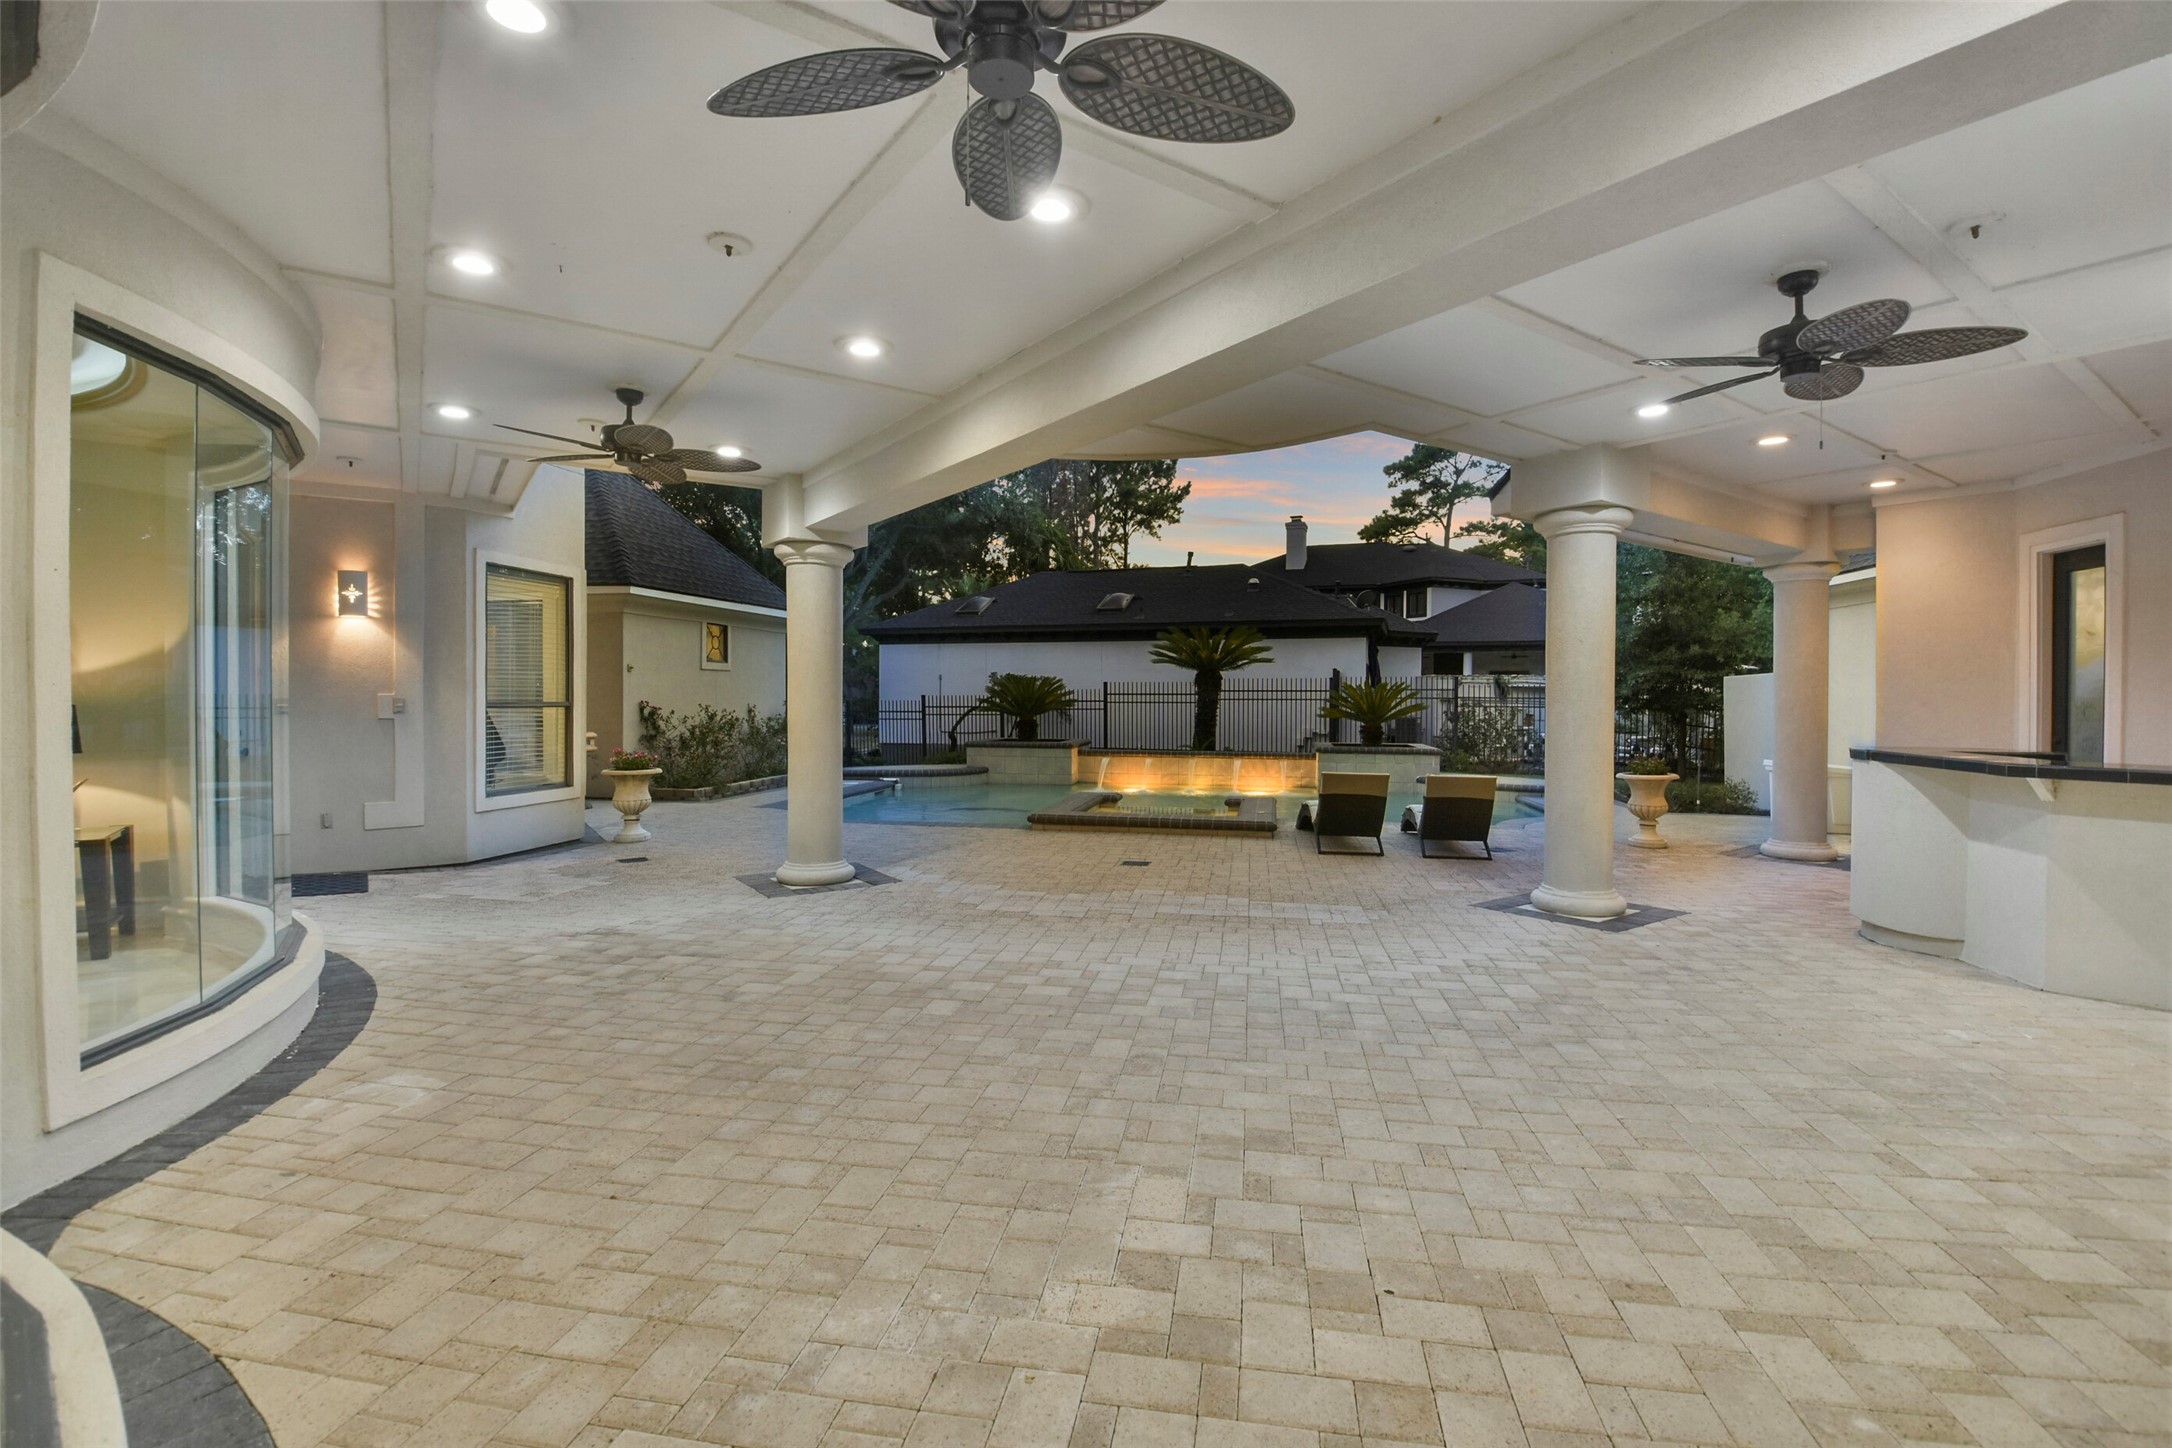 Spacious covered back porch is ideal for hosting parties.